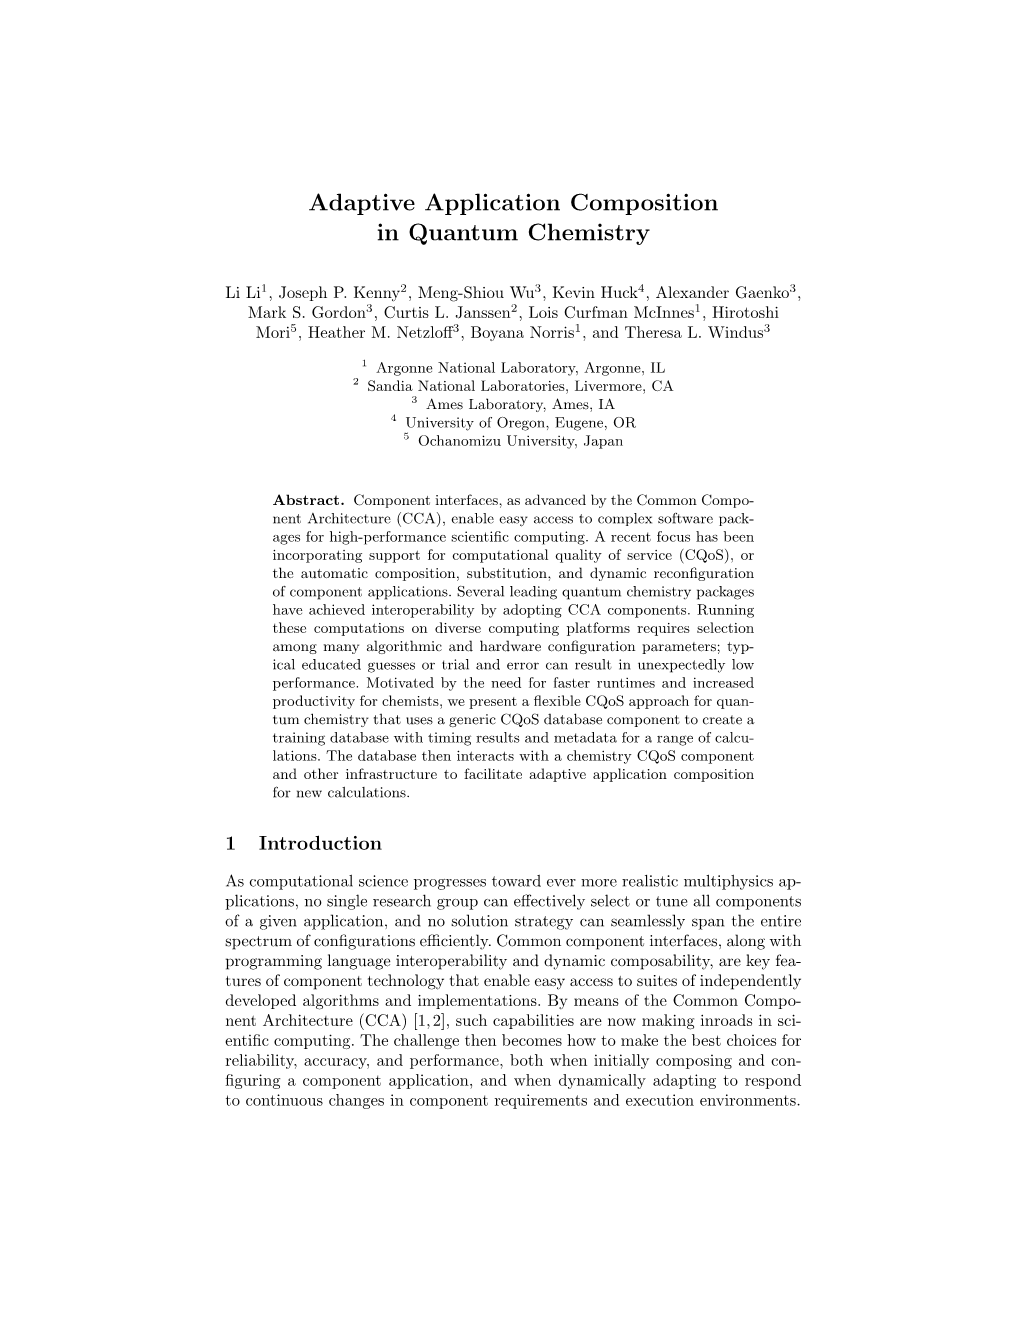 Adaptive Application Composition in Quantum Chemistry